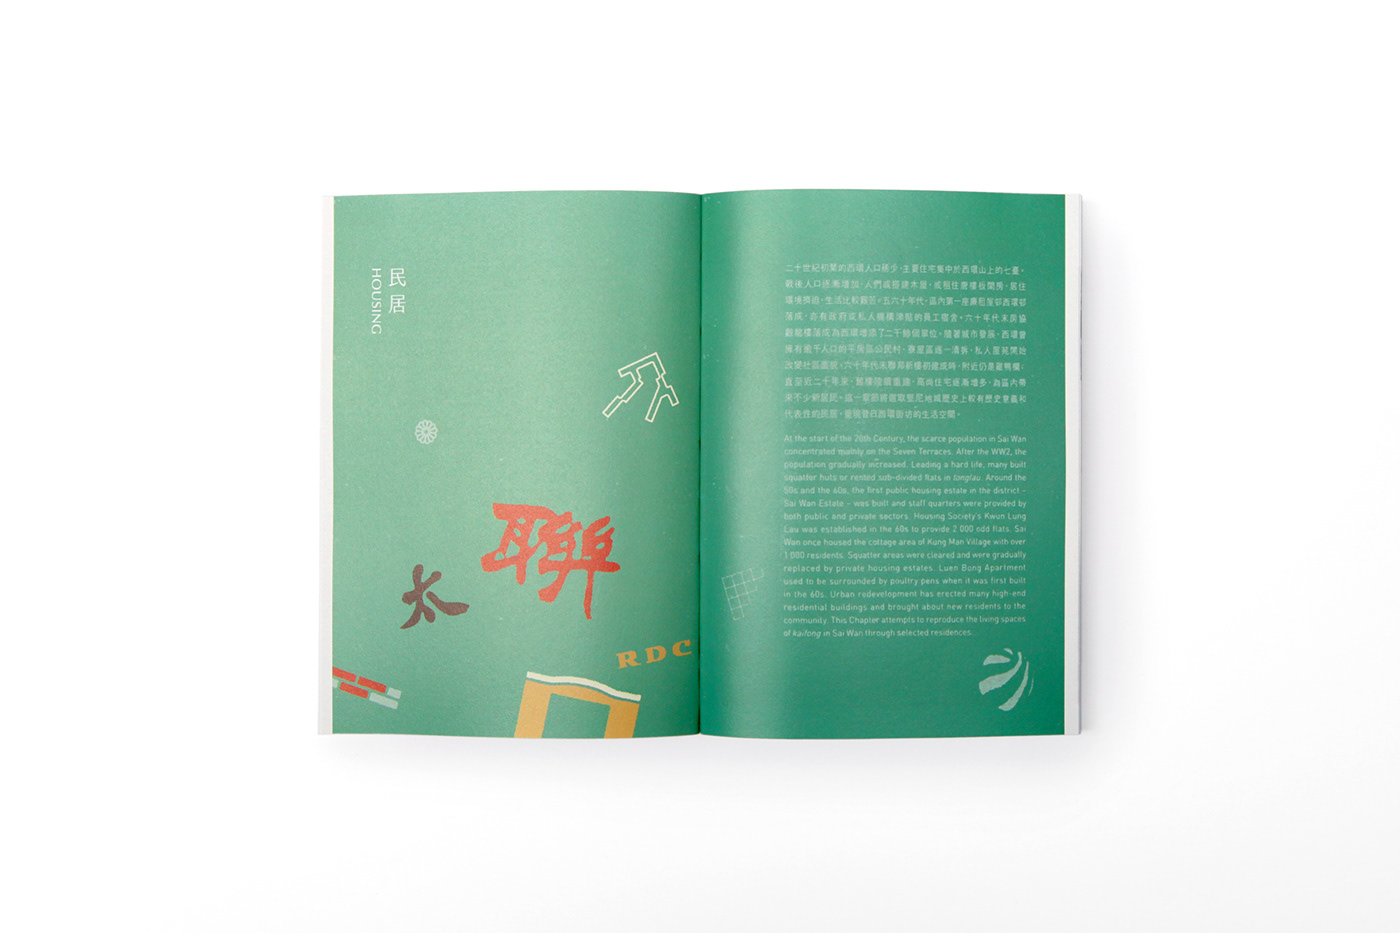 editorial design  book design kennedy town graphic design  historical community Printing ILLUSTRATION  Hong Kong art direction 